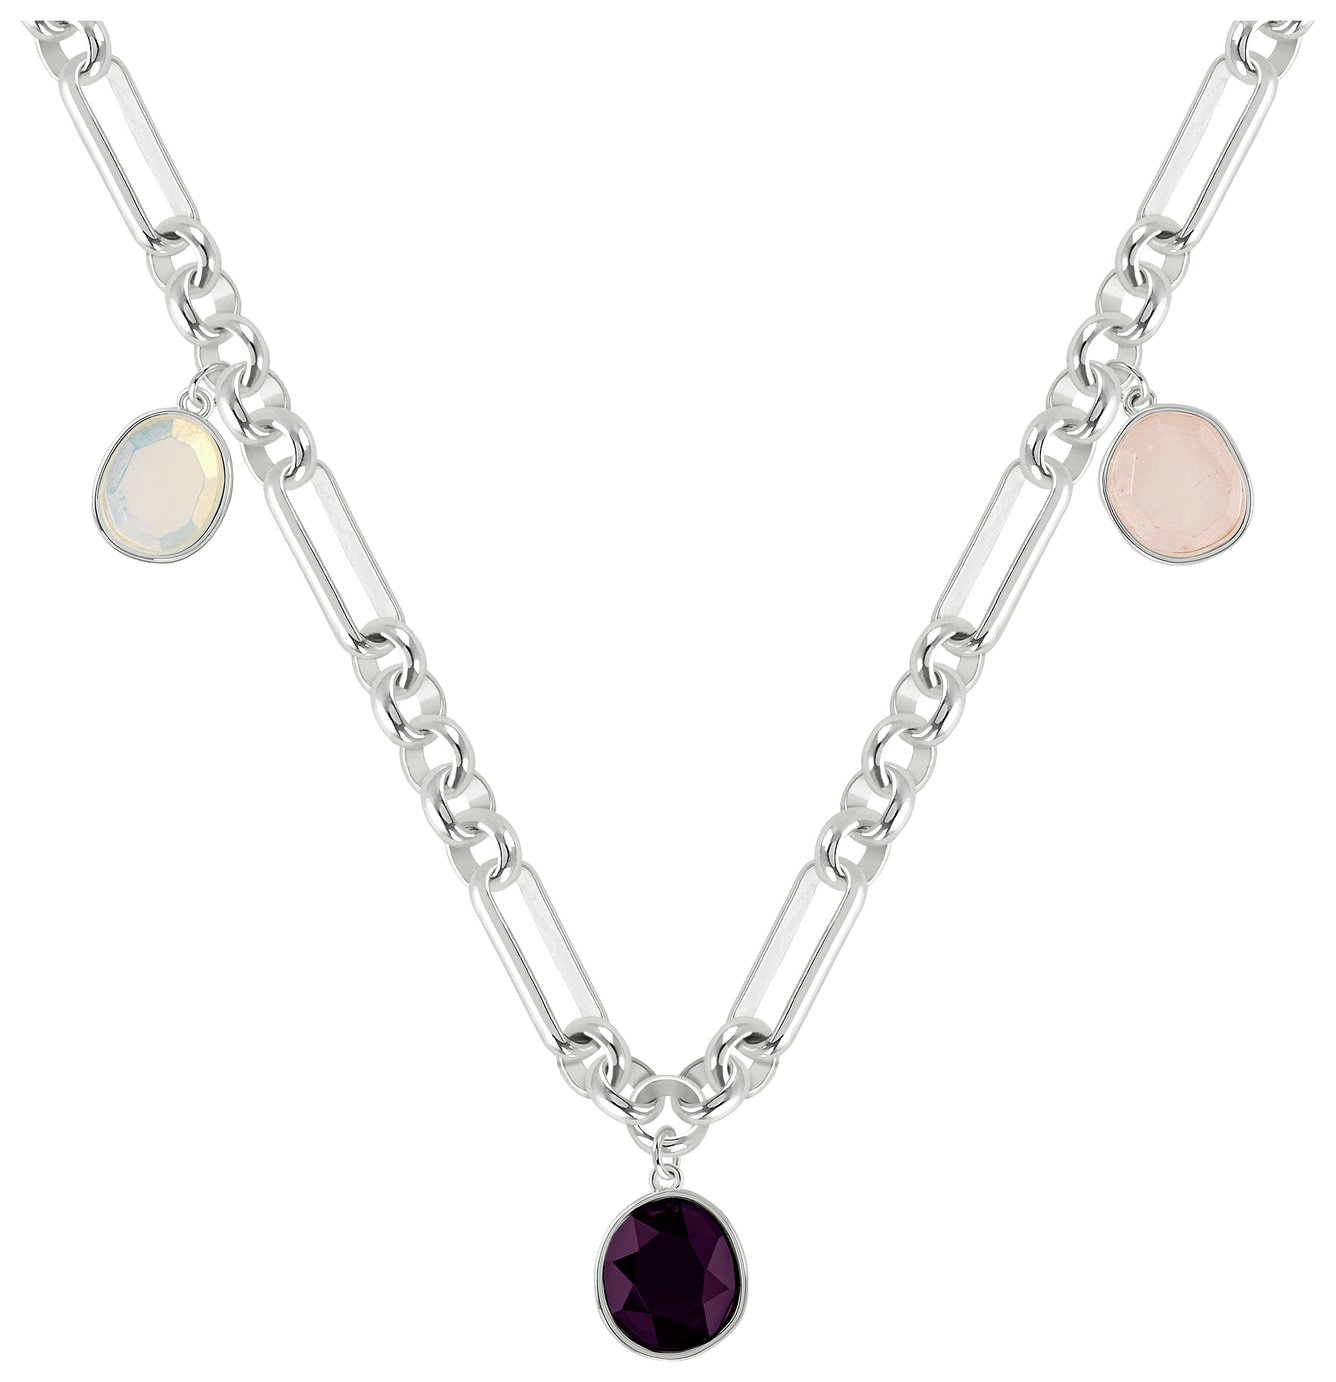 Radley Sterling Silver Multicoloured Stone Charm Necklace